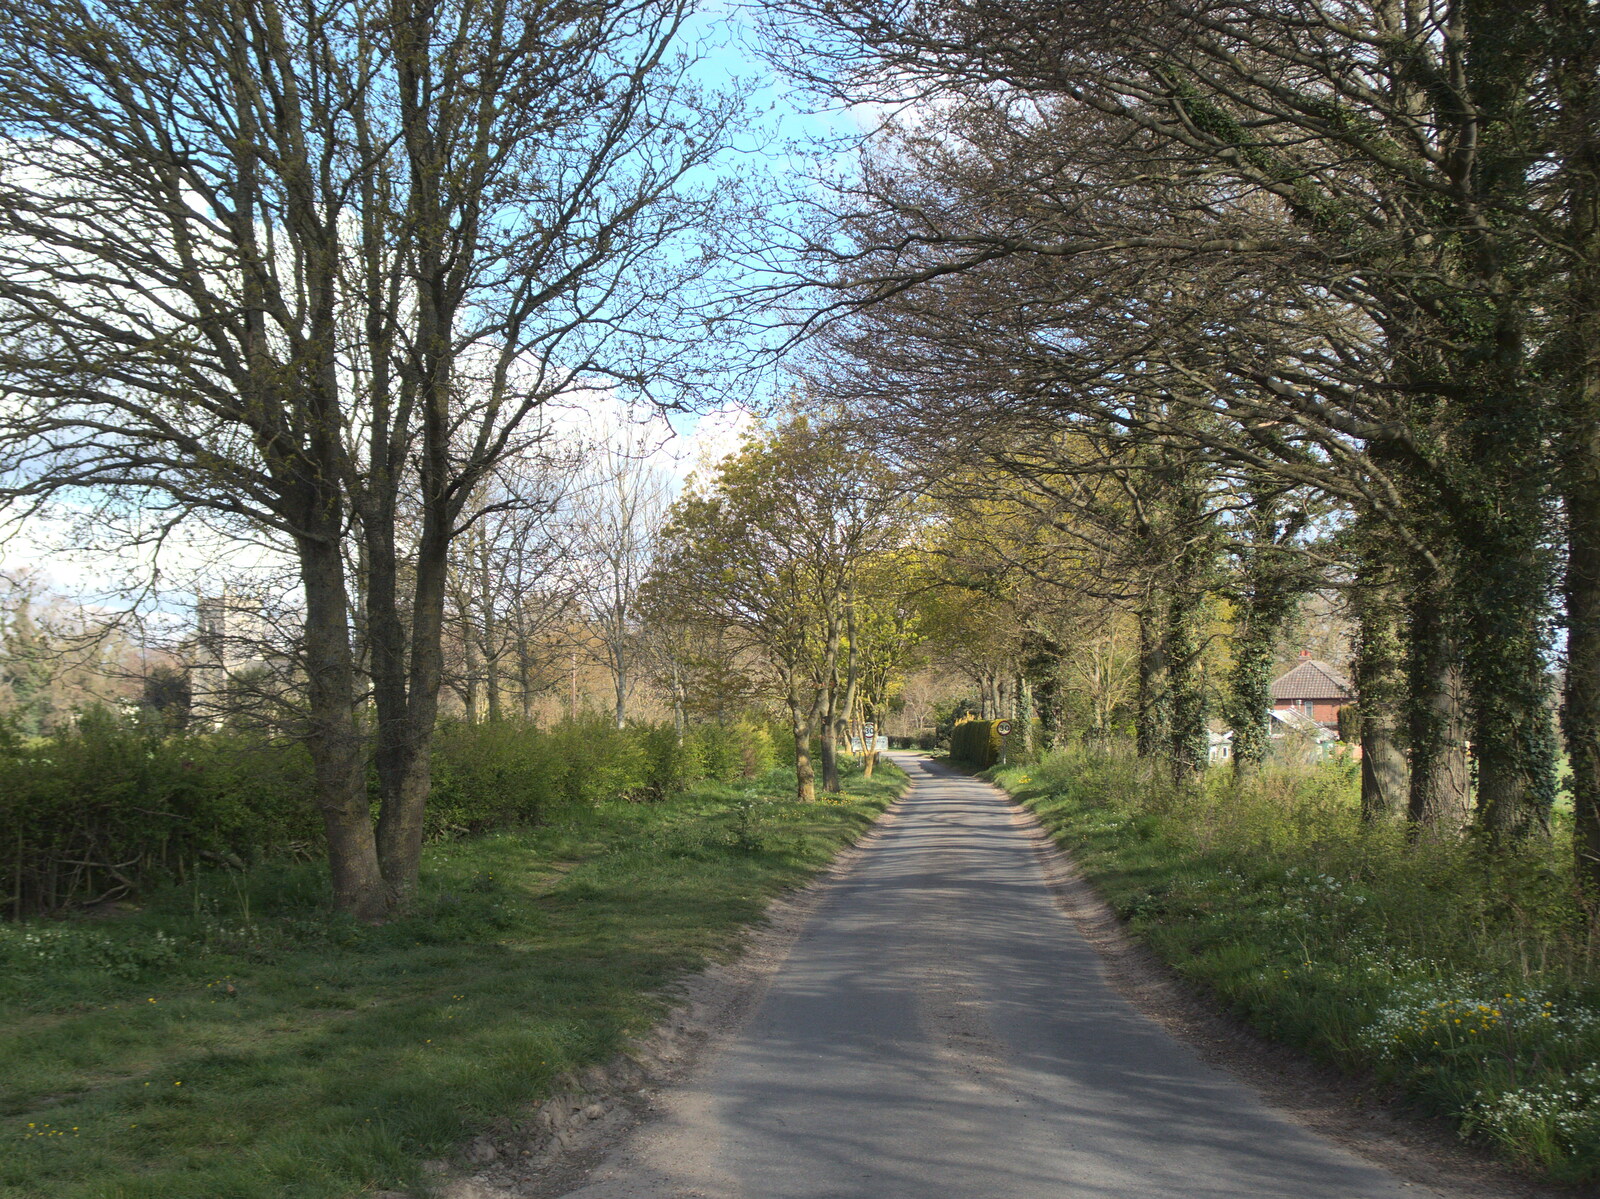 The road into Thrandeston from A Vaccination Afternoon, Swaffham, Norfolk - 9th May 2021